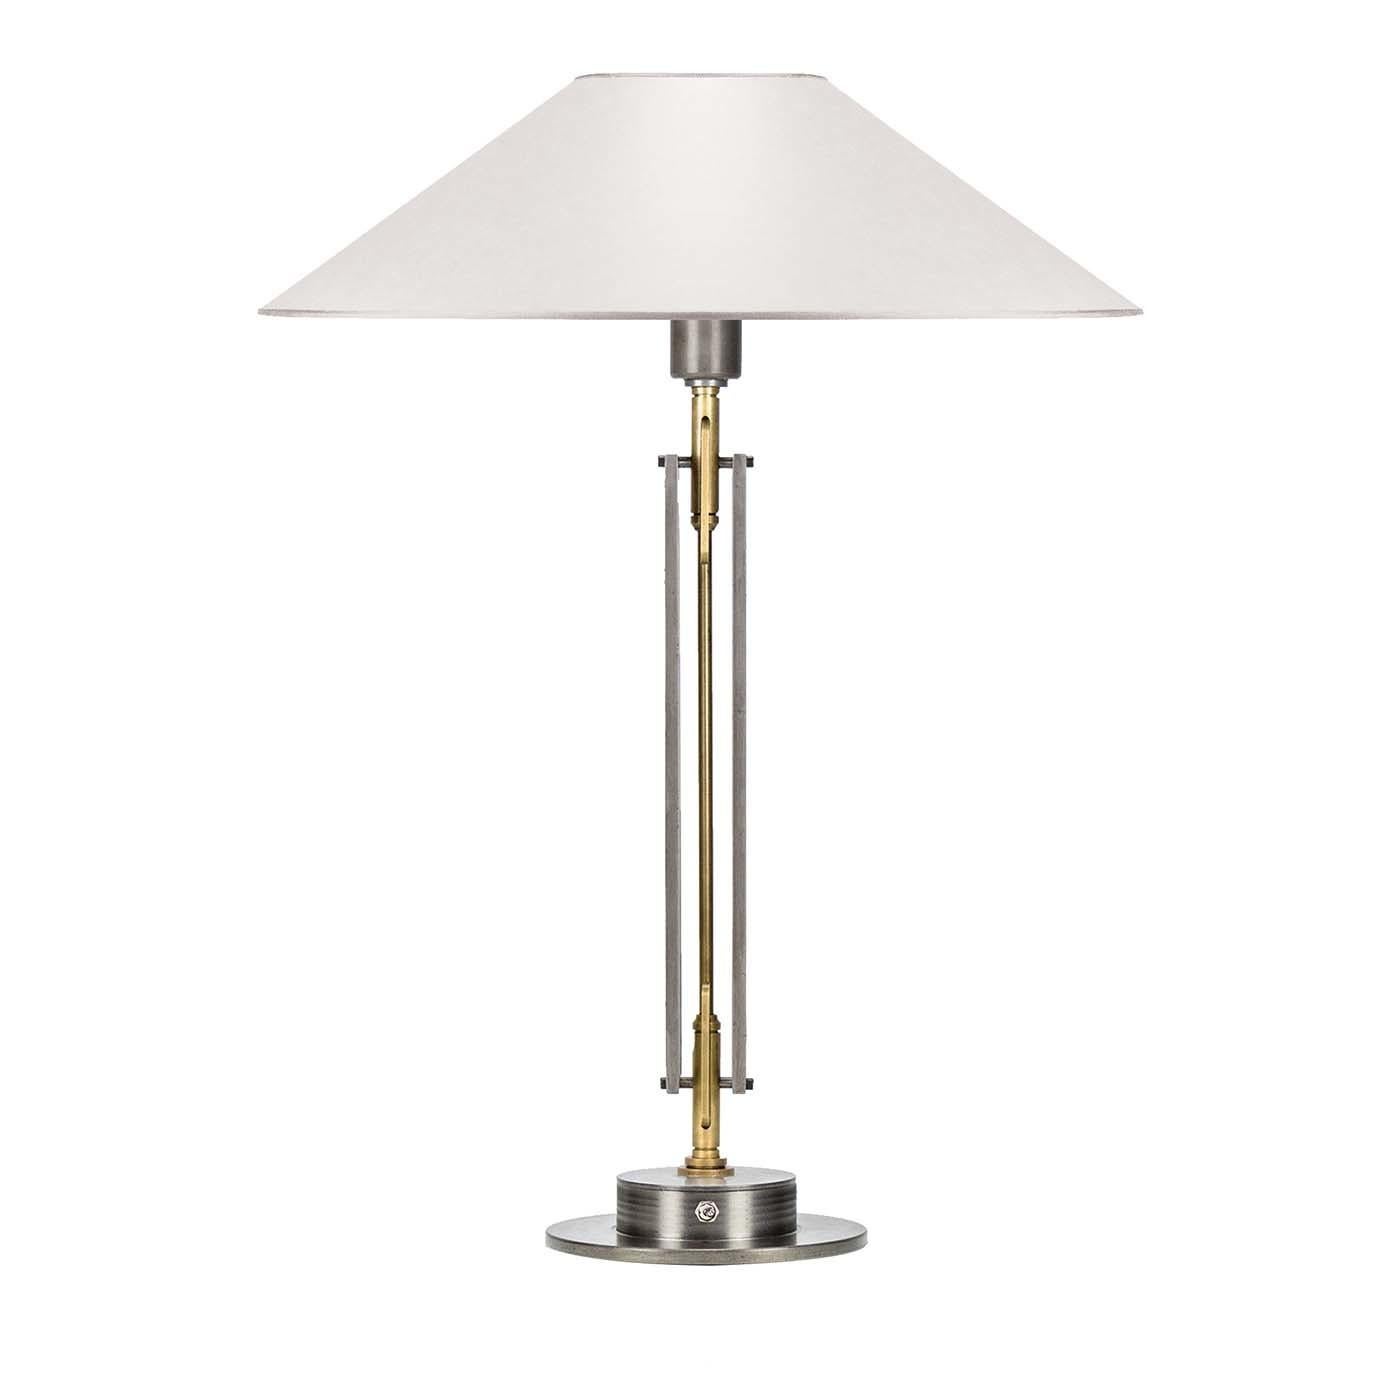 Imbued with timeless elegance, this table lamp will light up any corner at home with midcentury inspiration. Paired with both modern and traditional styles, this stylish piece showcases a sleek column with a brass rod encased in an open steel frame